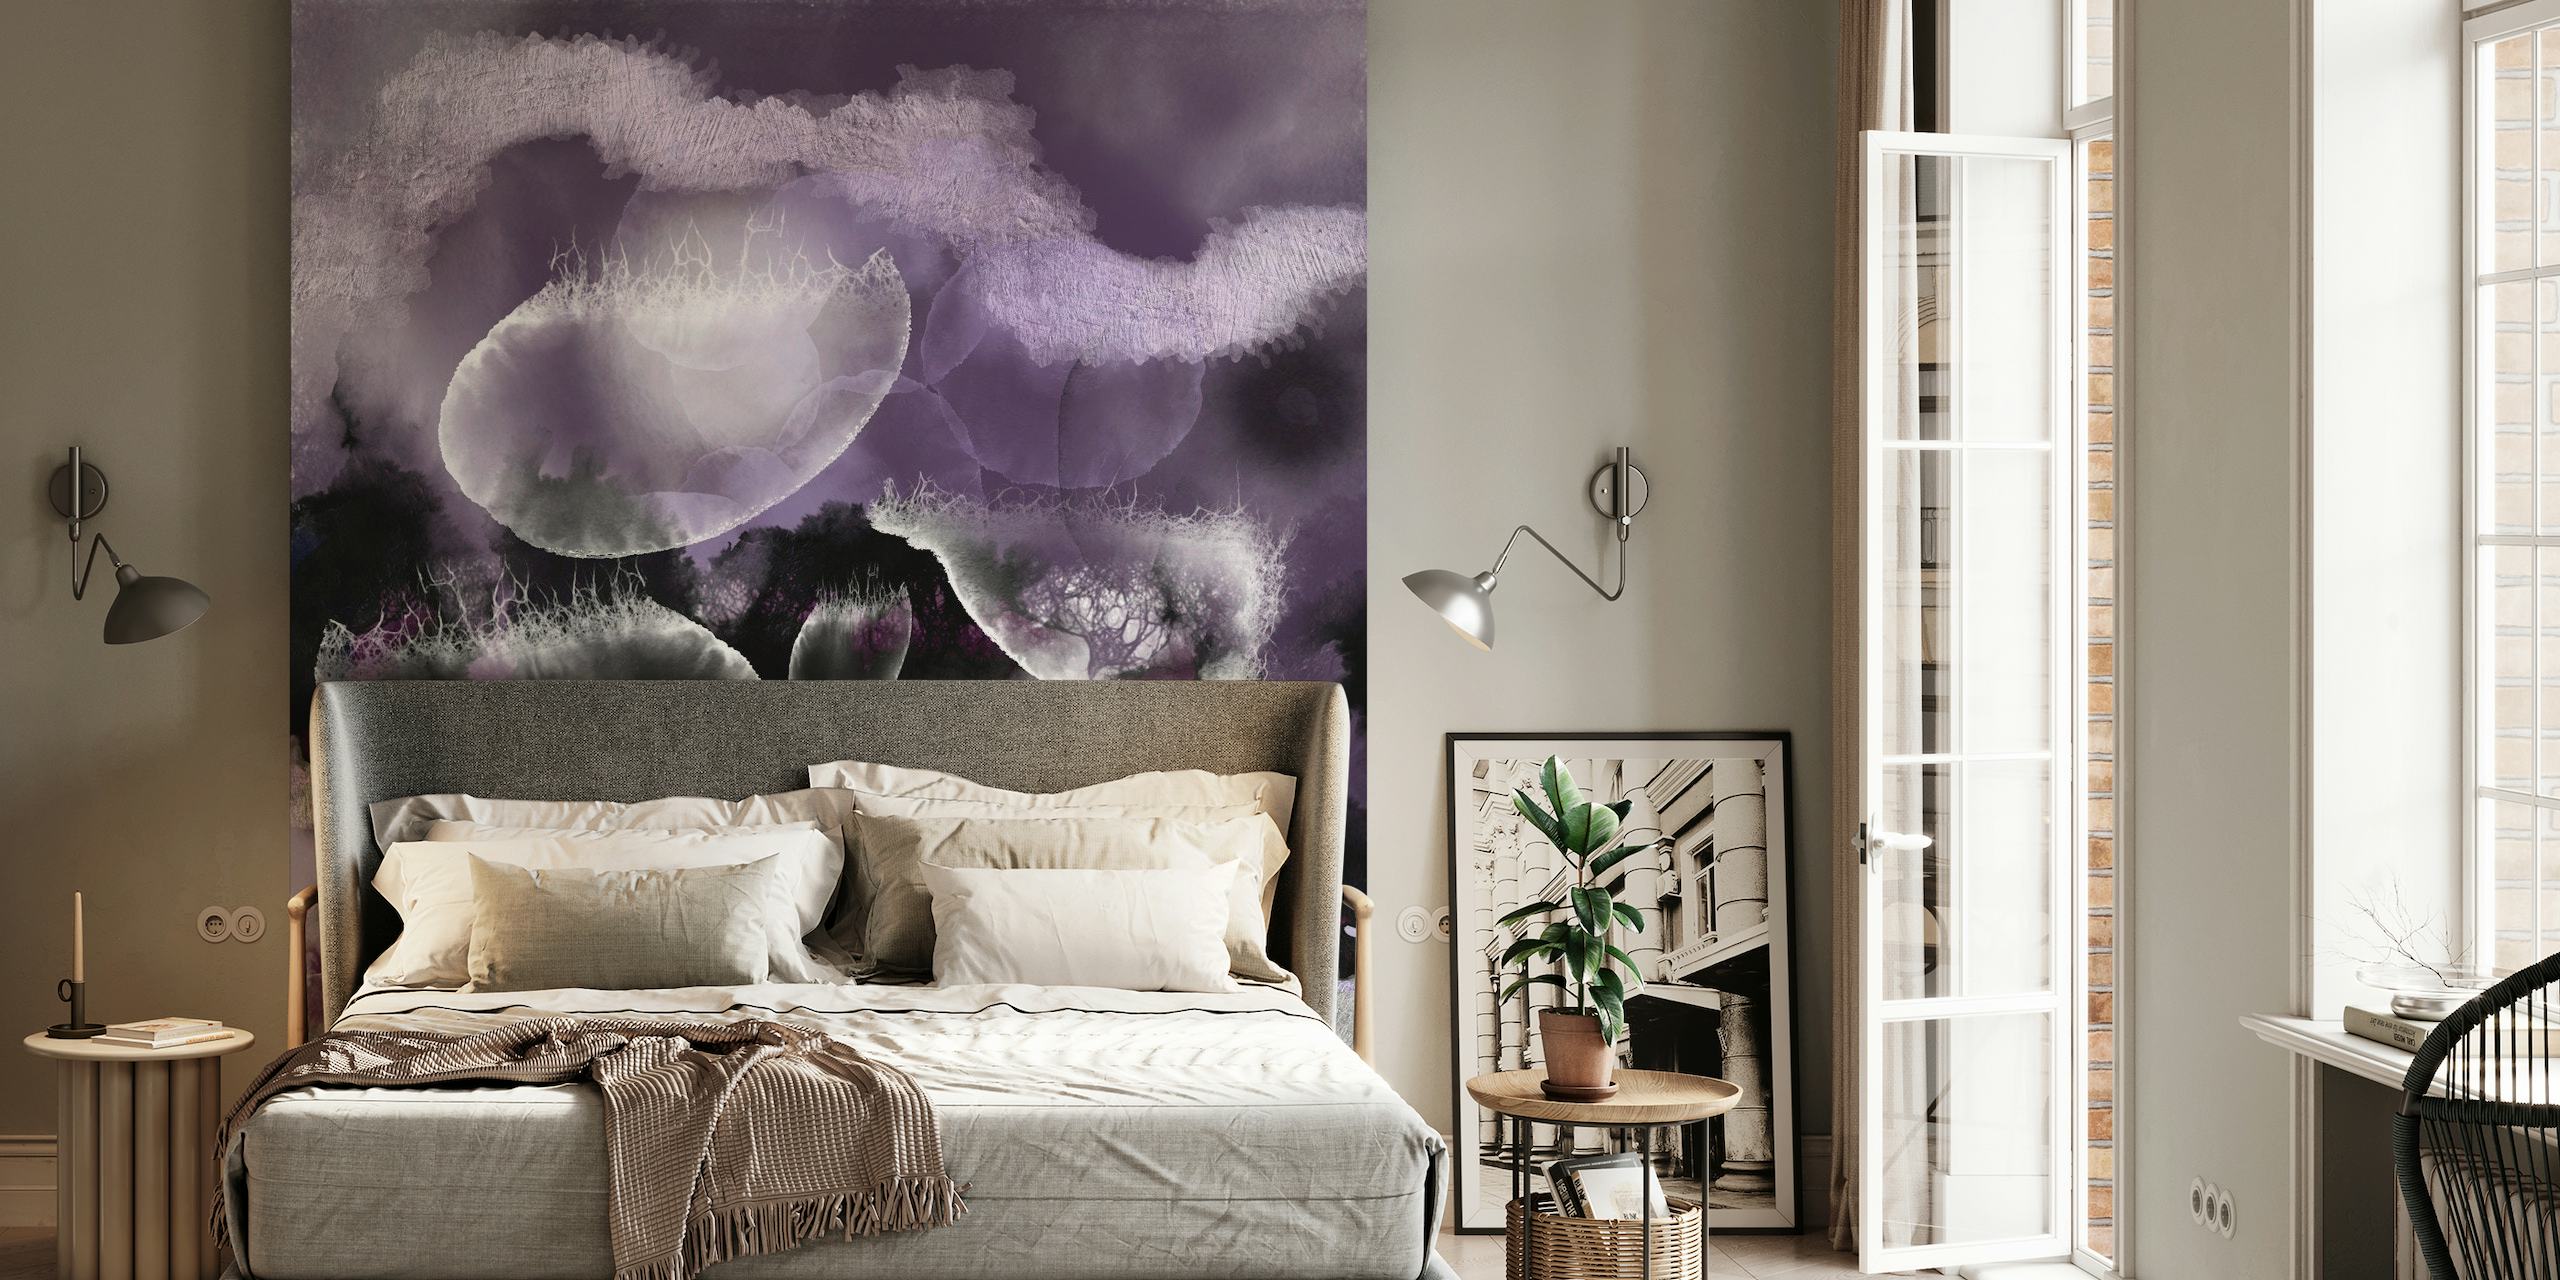 Abstract ocean-inspired wall mural in purple tones with ethereal underwater-like patterns